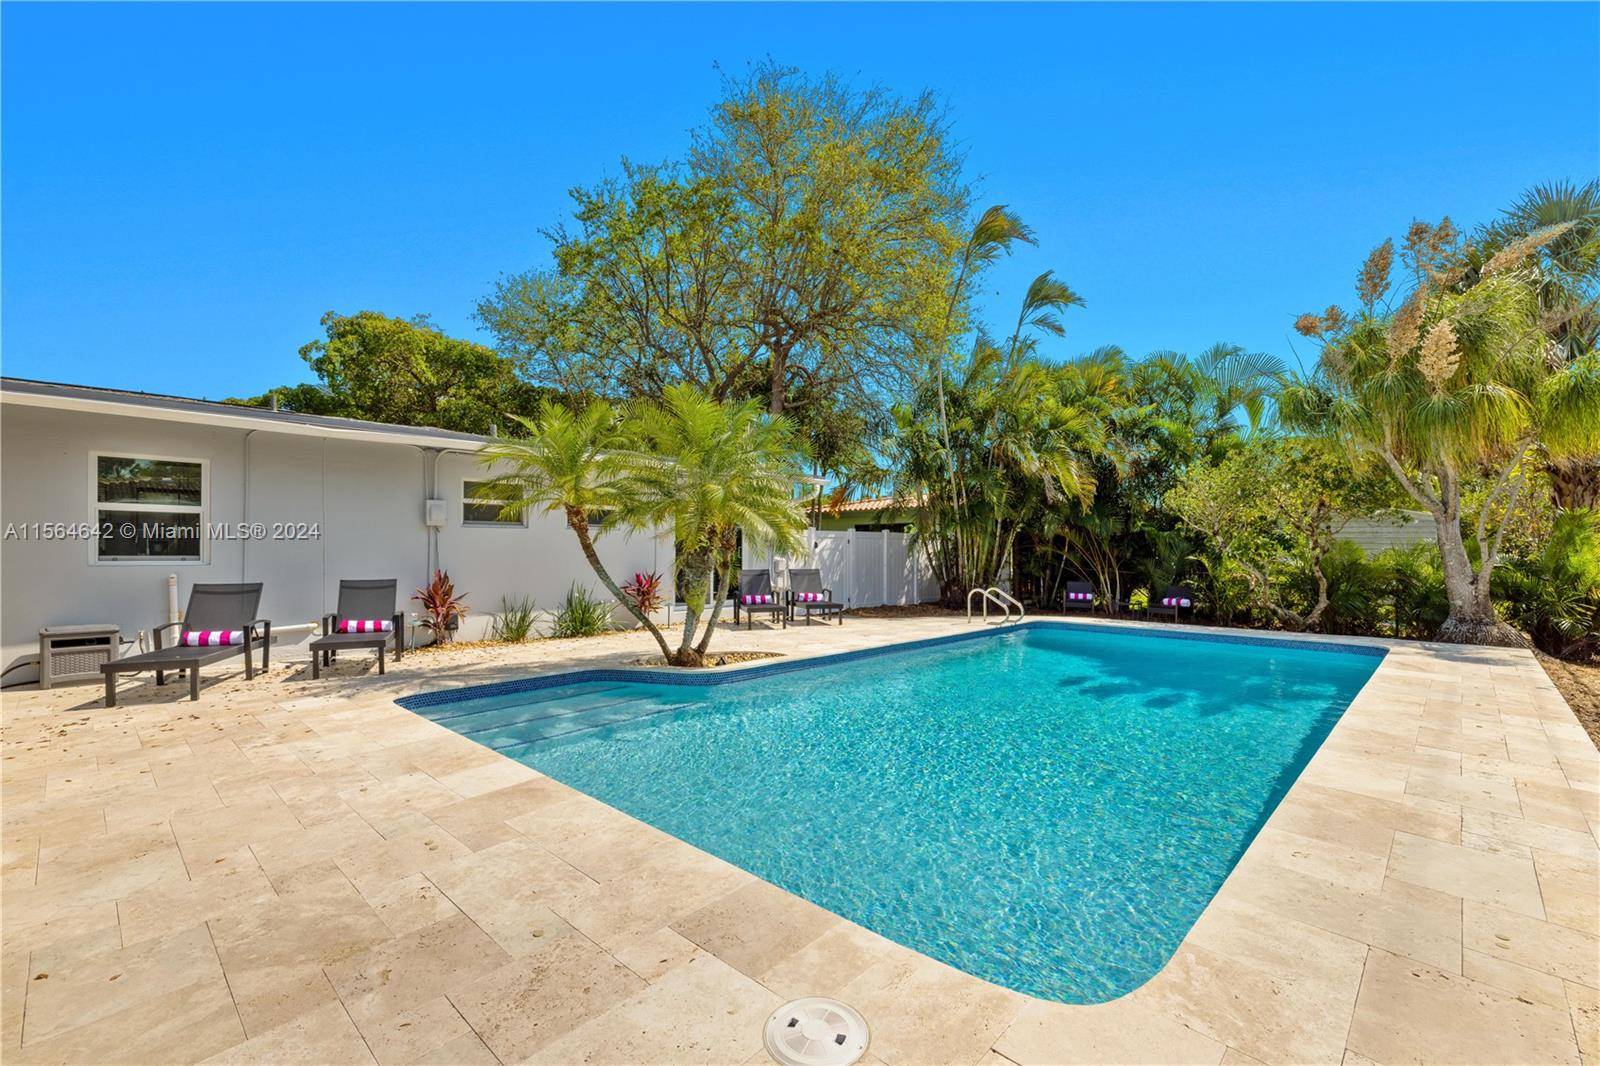 Escape the chaos of everyday life in this serene recently renovated pool home with a 2 car garage in the sought after Wilton Manors neighborhood.